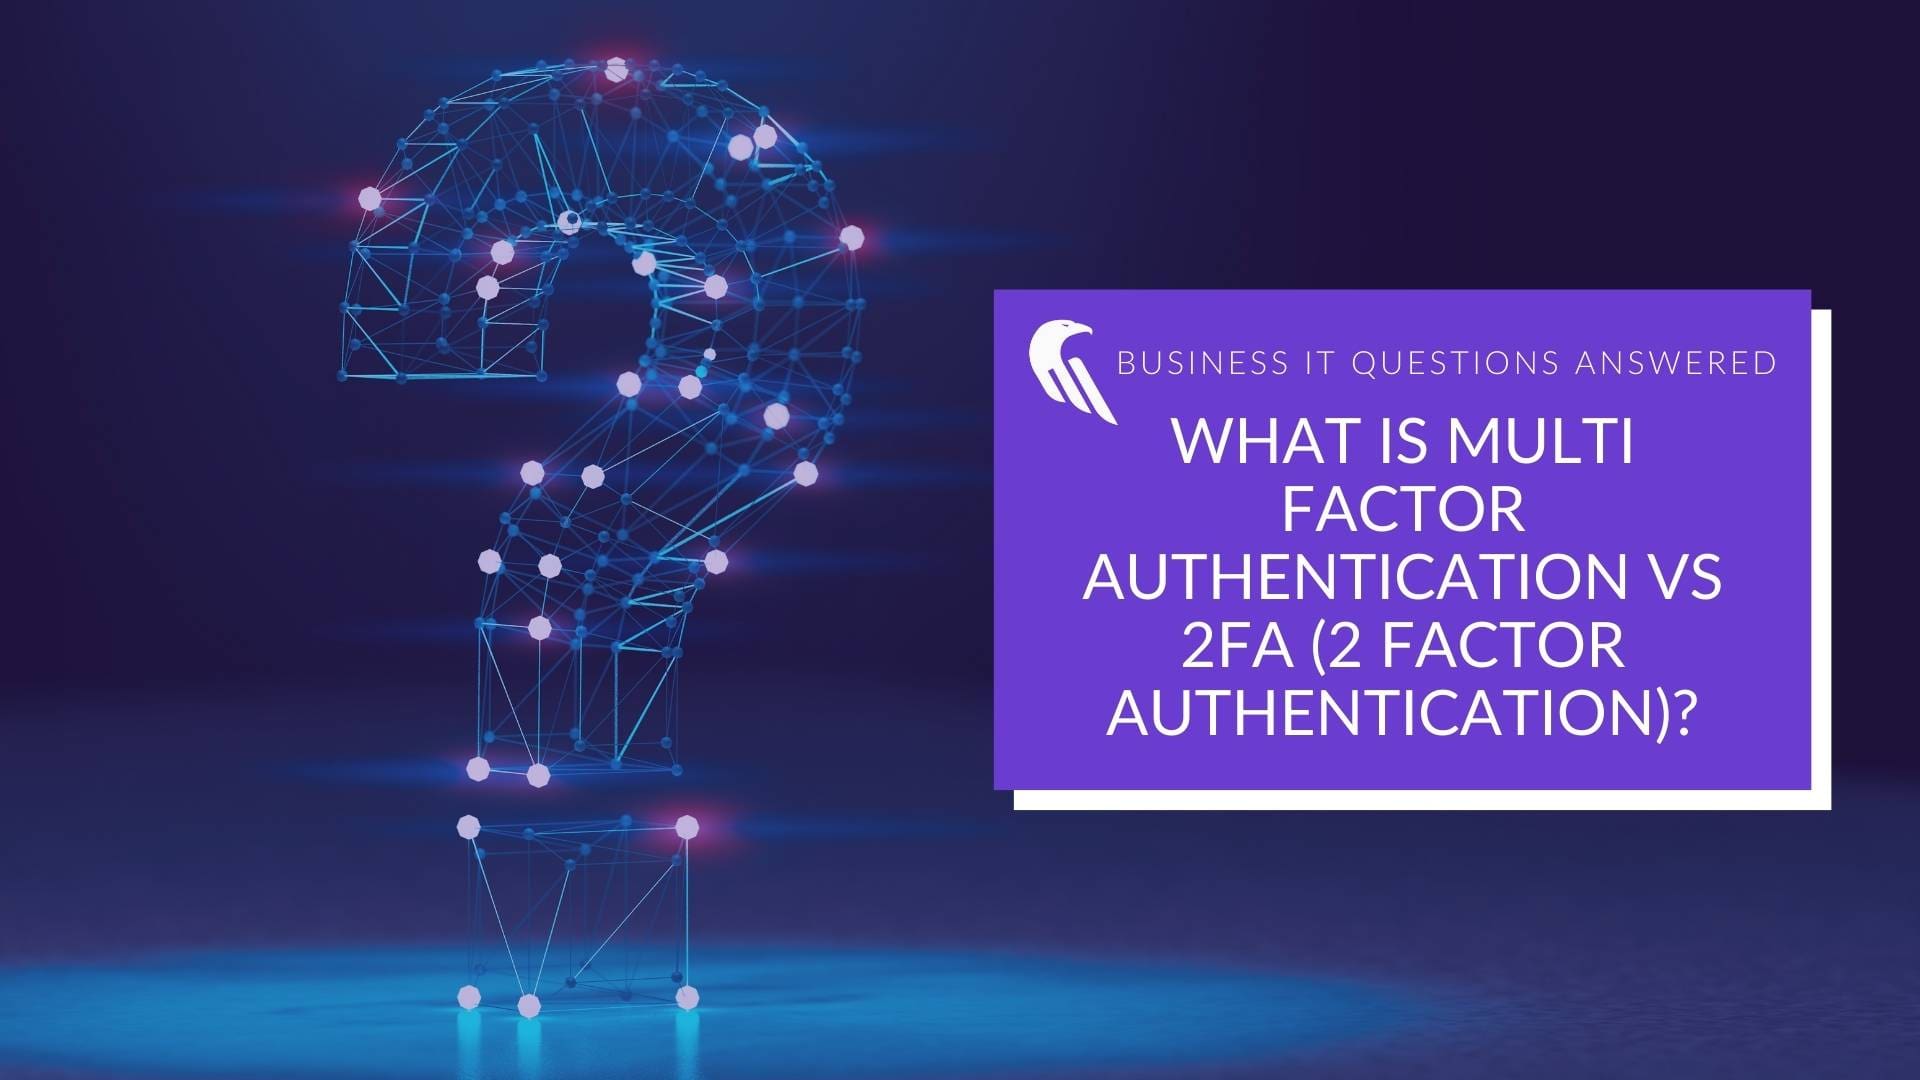 Multi factor authentication and 2 factor authentication FAQ graphic